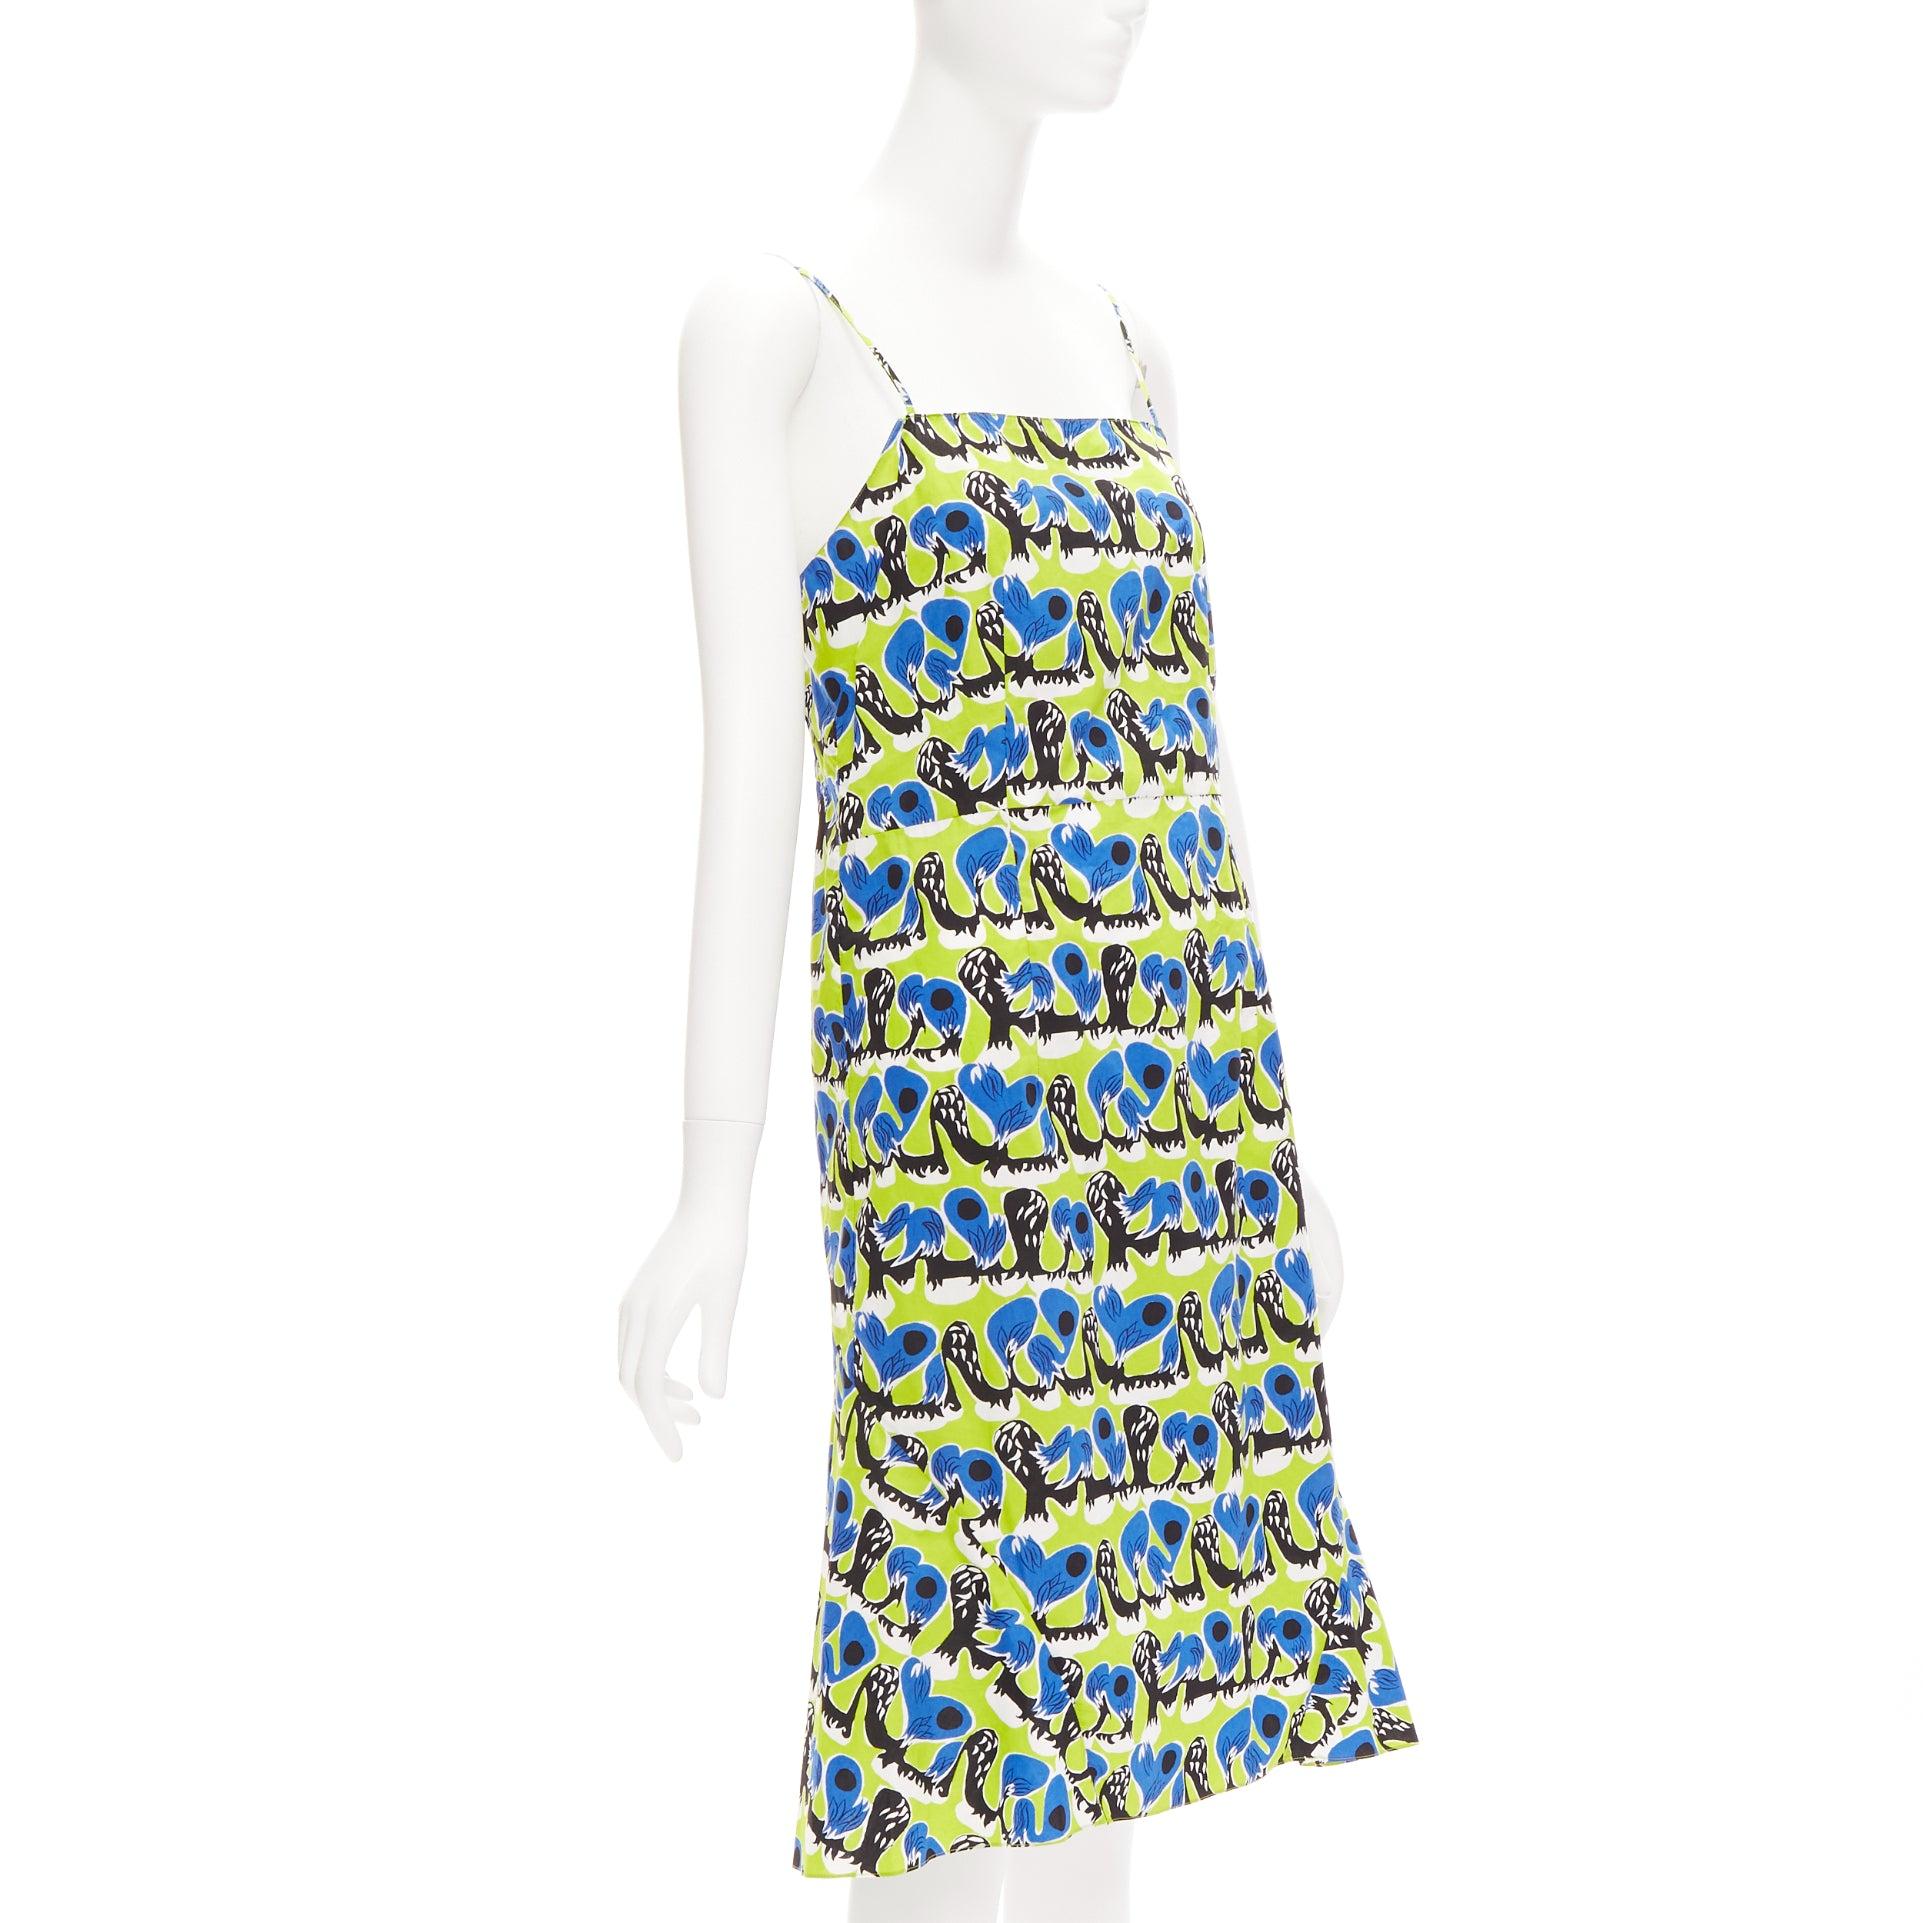 MARNI green blue geometric print cotton kick flared summer dress IT42 M
Reference: CELG/A00275
Brand: Marni
Material: Cotton
Color: Green, Blue
Pattern: Geometric
Closure: Slip On
Made in: Italy

CONDITION:
Condition: Good, this item was pre-owned